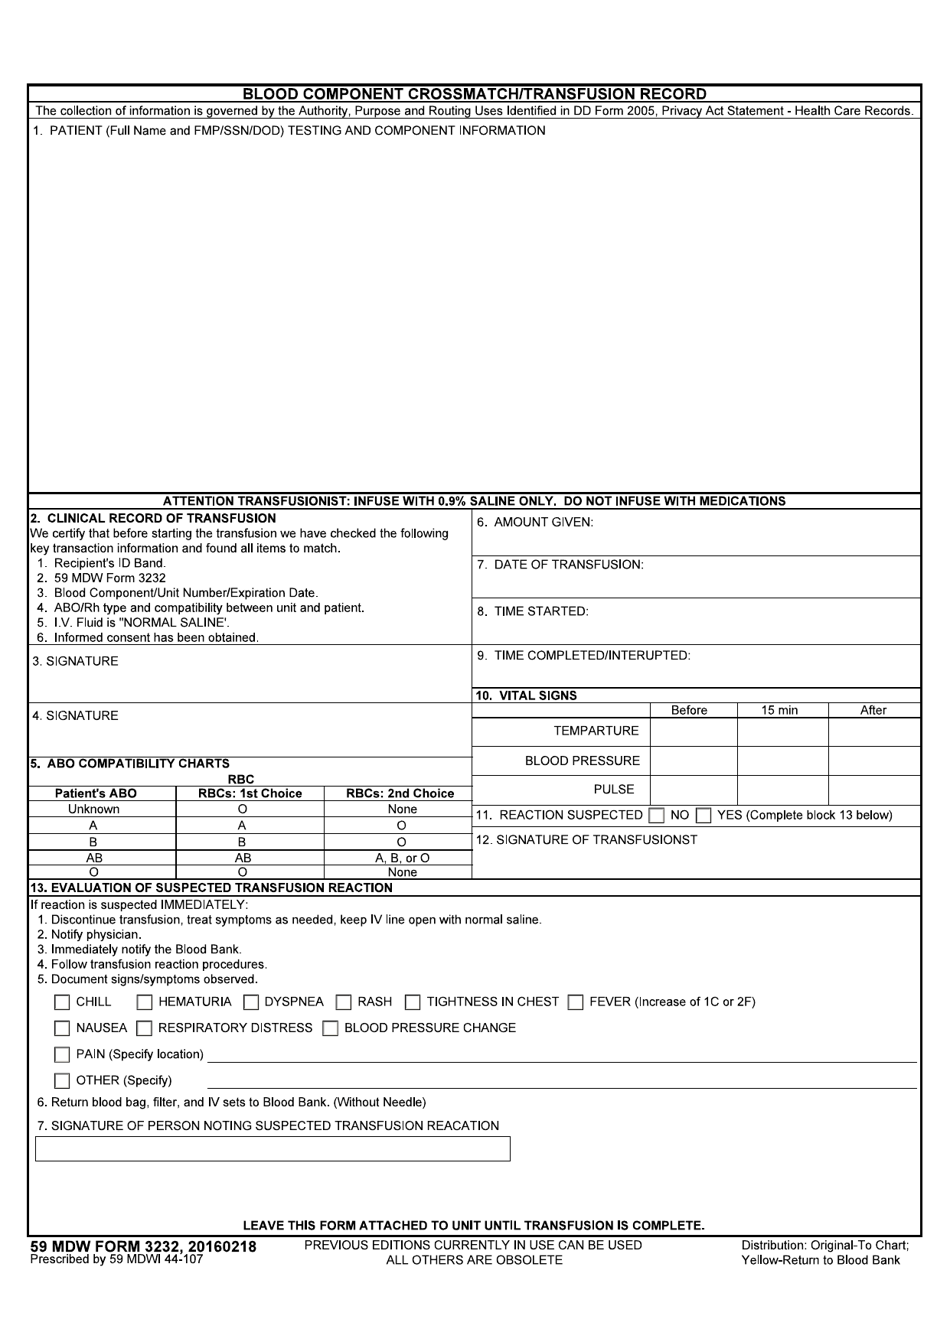 59 MDW Form 3232 Blood Component Crossmatch / Transfusion Record, Page 1